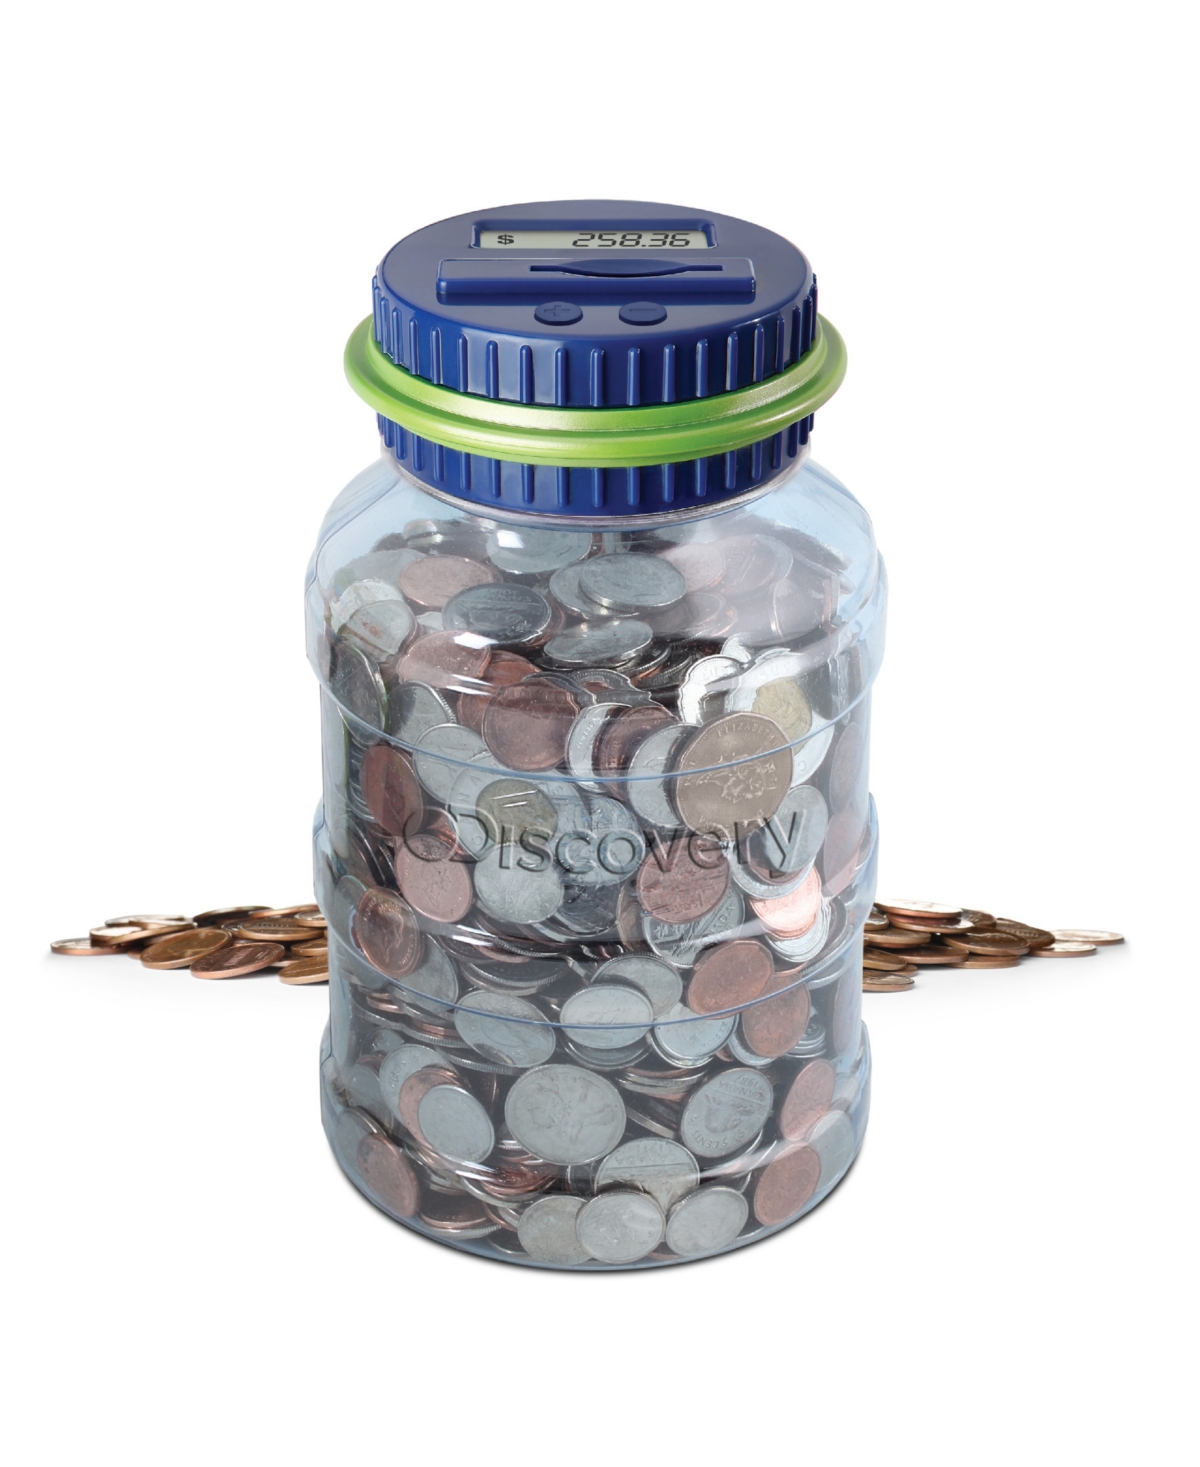 Discovery Digital Coin-counting Money Jar With Lcd Screen In Open Miscellaneous